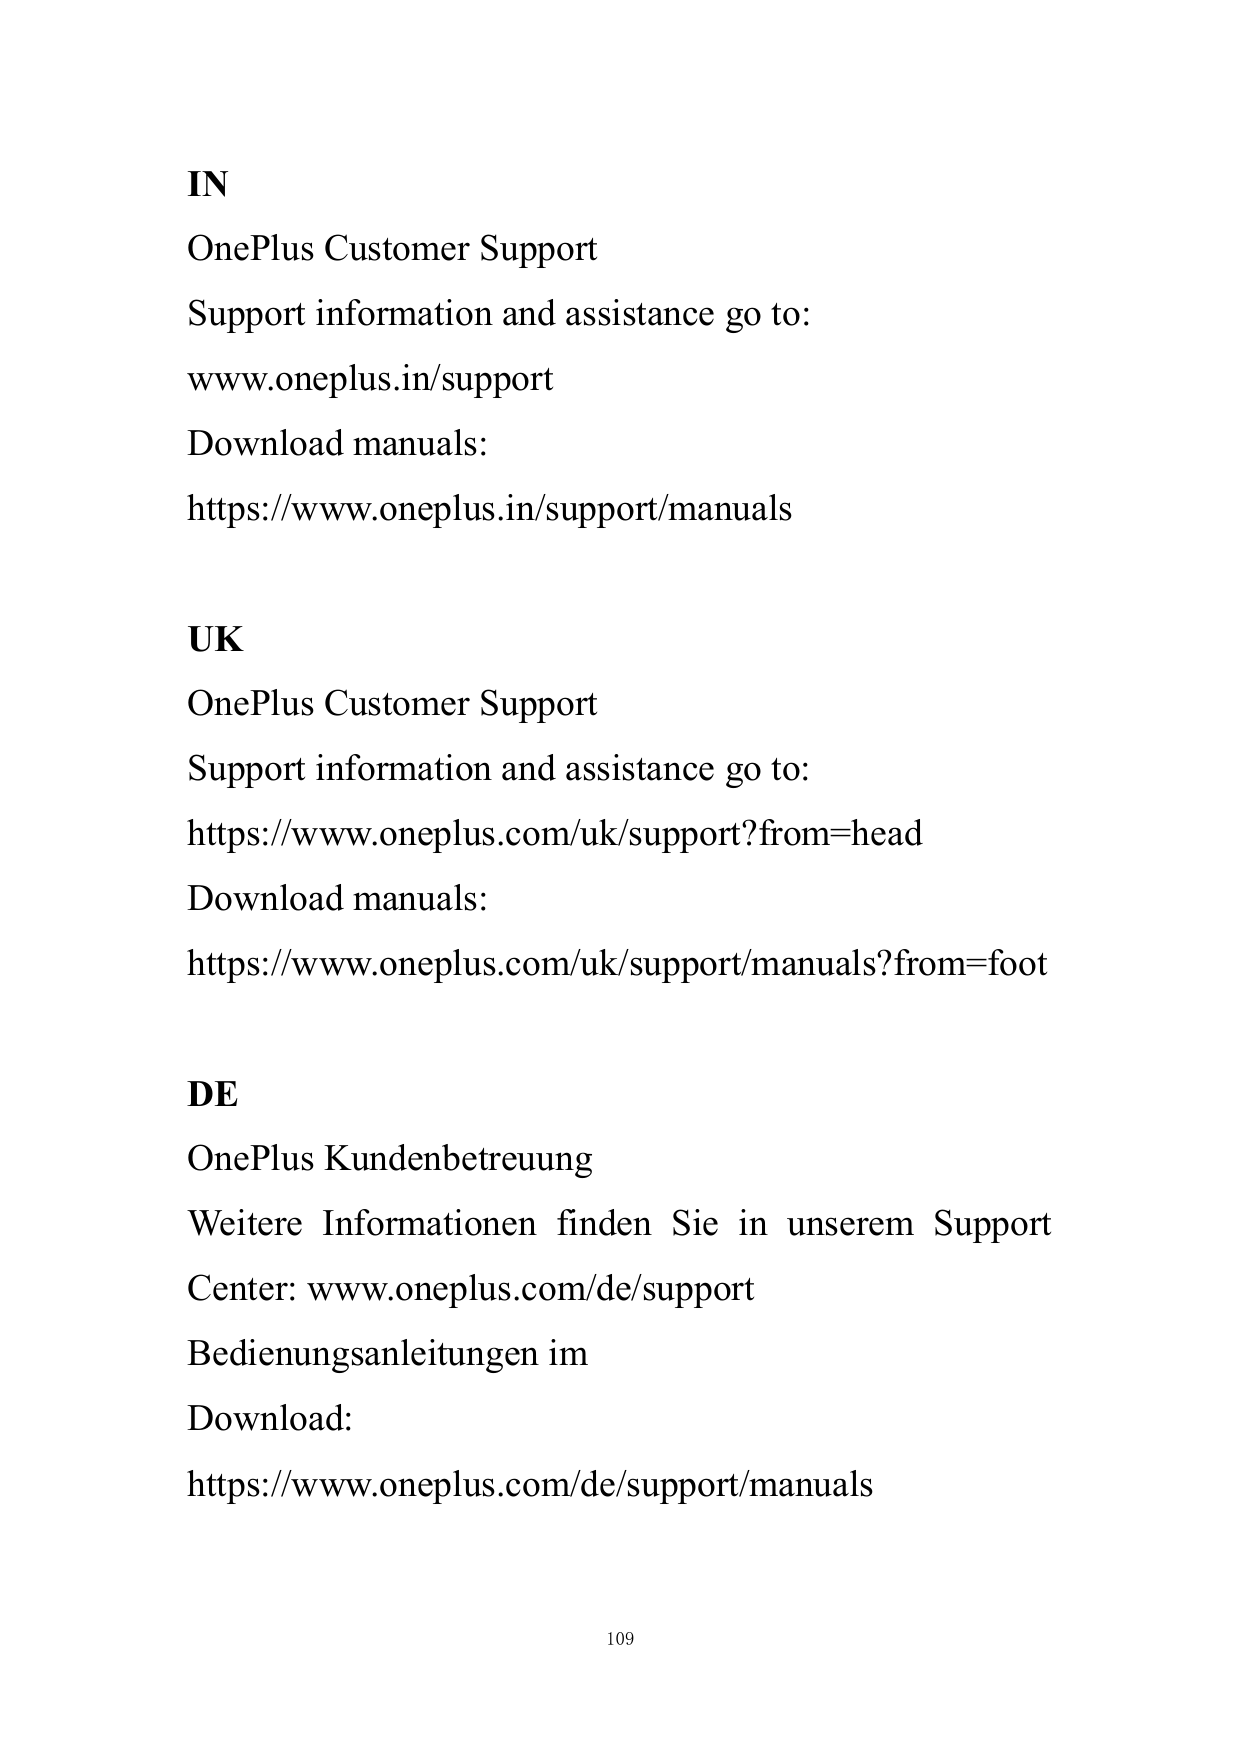 INOnePlus Customer SupportSupport information and assistance go to:www.oneplus.in/supportDownload manuals:https://www.oneplus.in